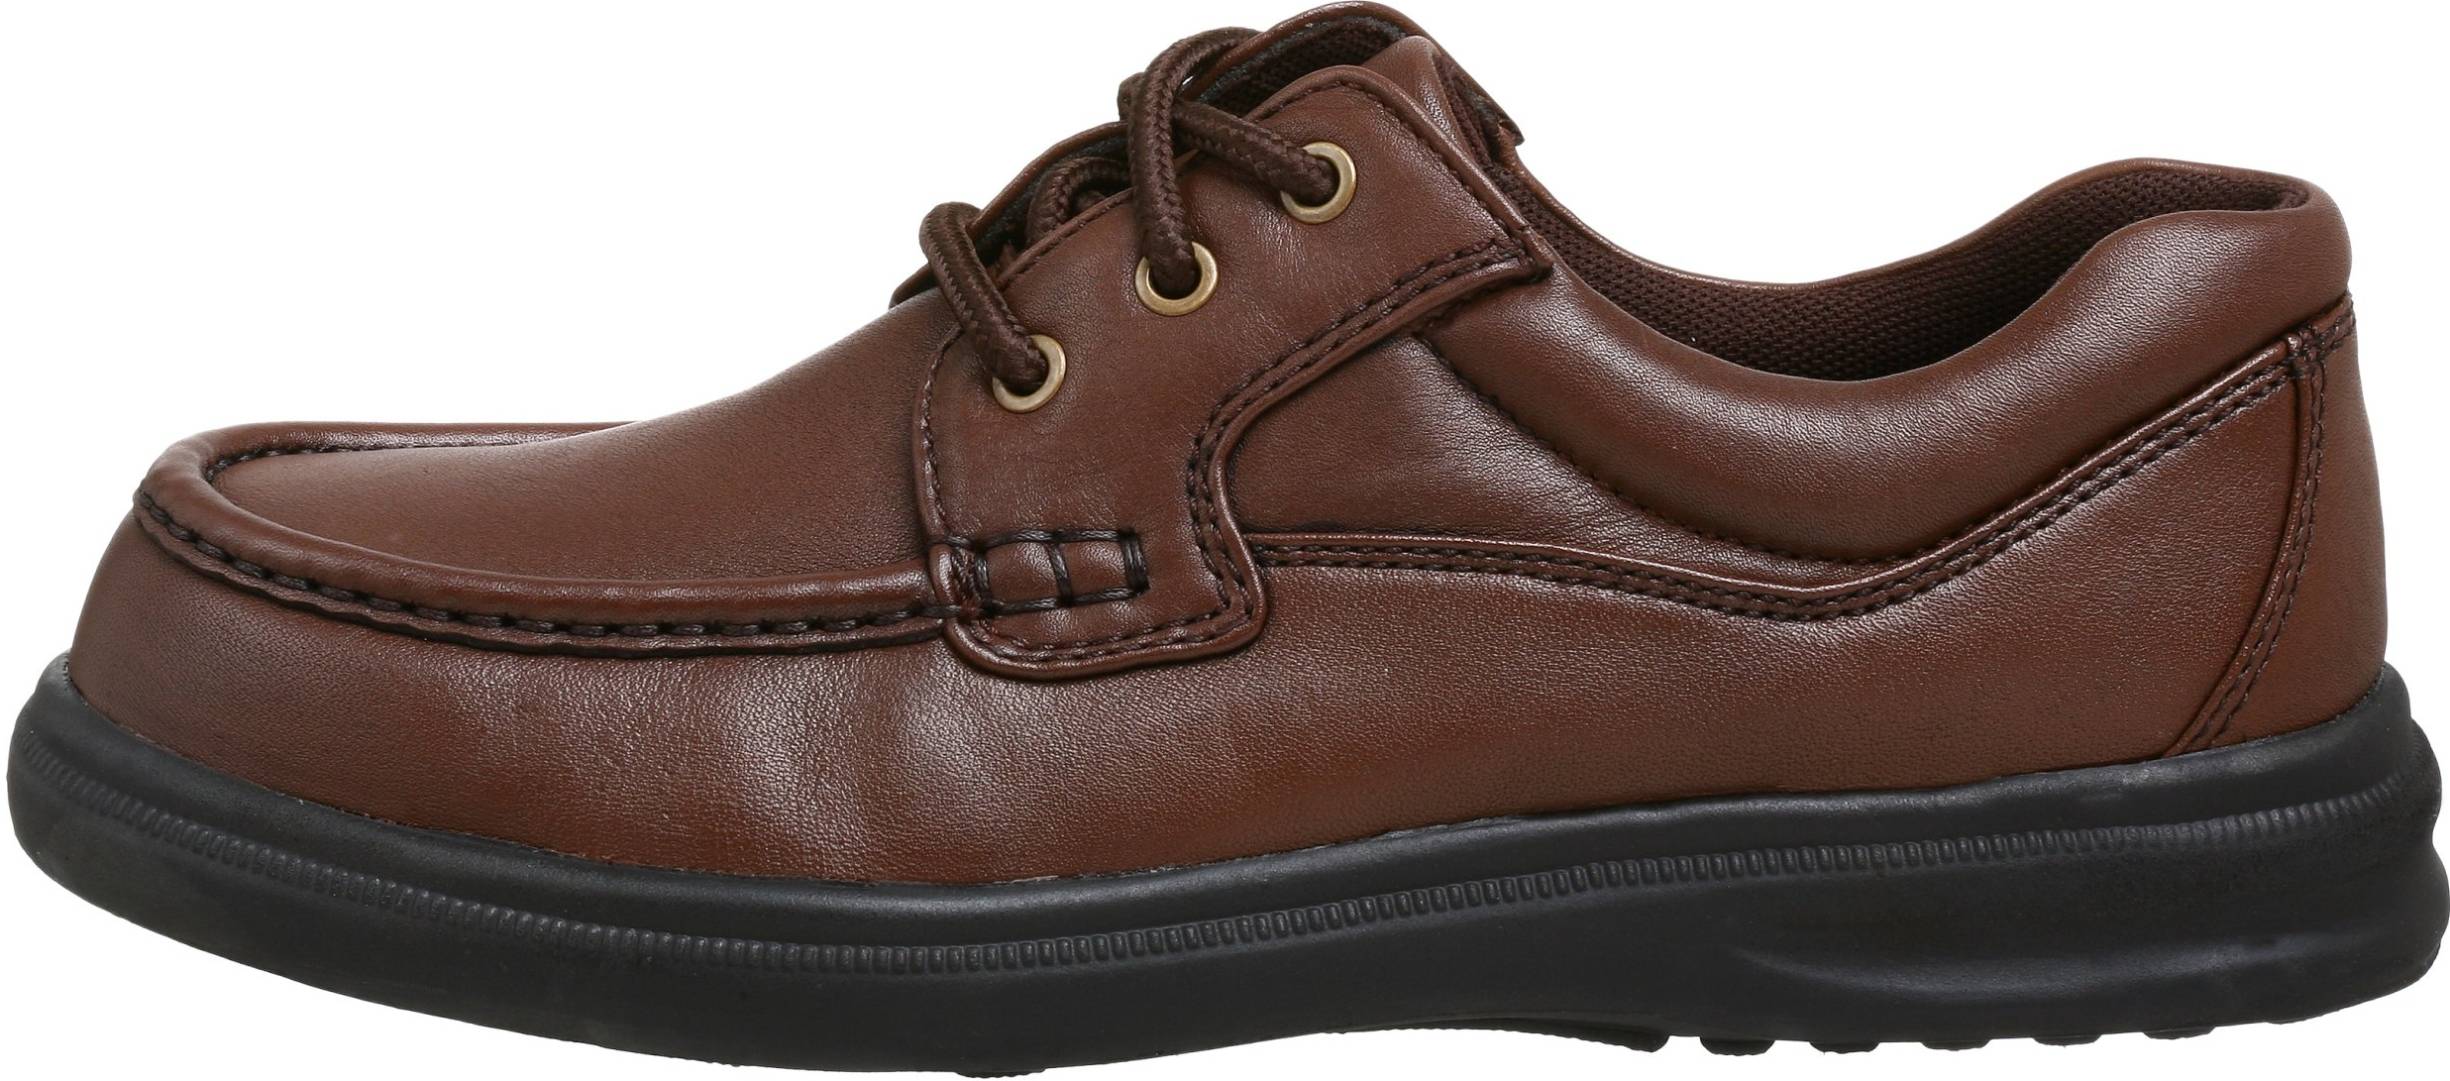 hush puppies most comfortable shoes